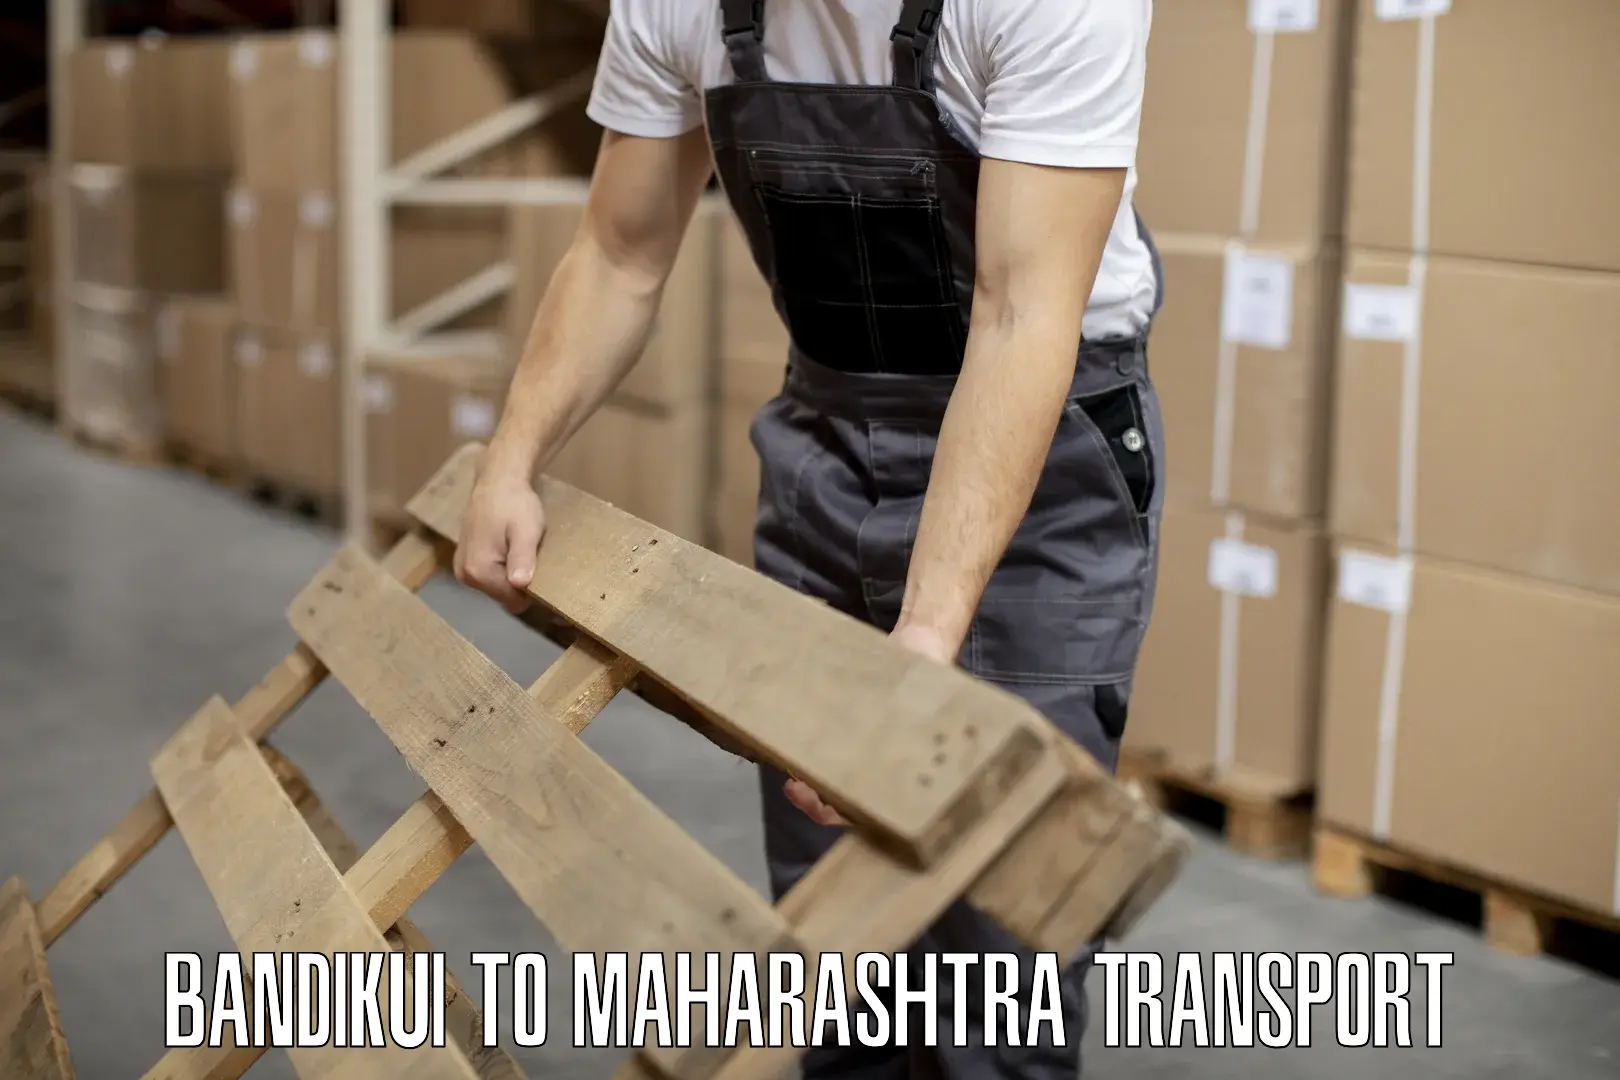 Truck transport companies in India in Bandikui to Nagothane